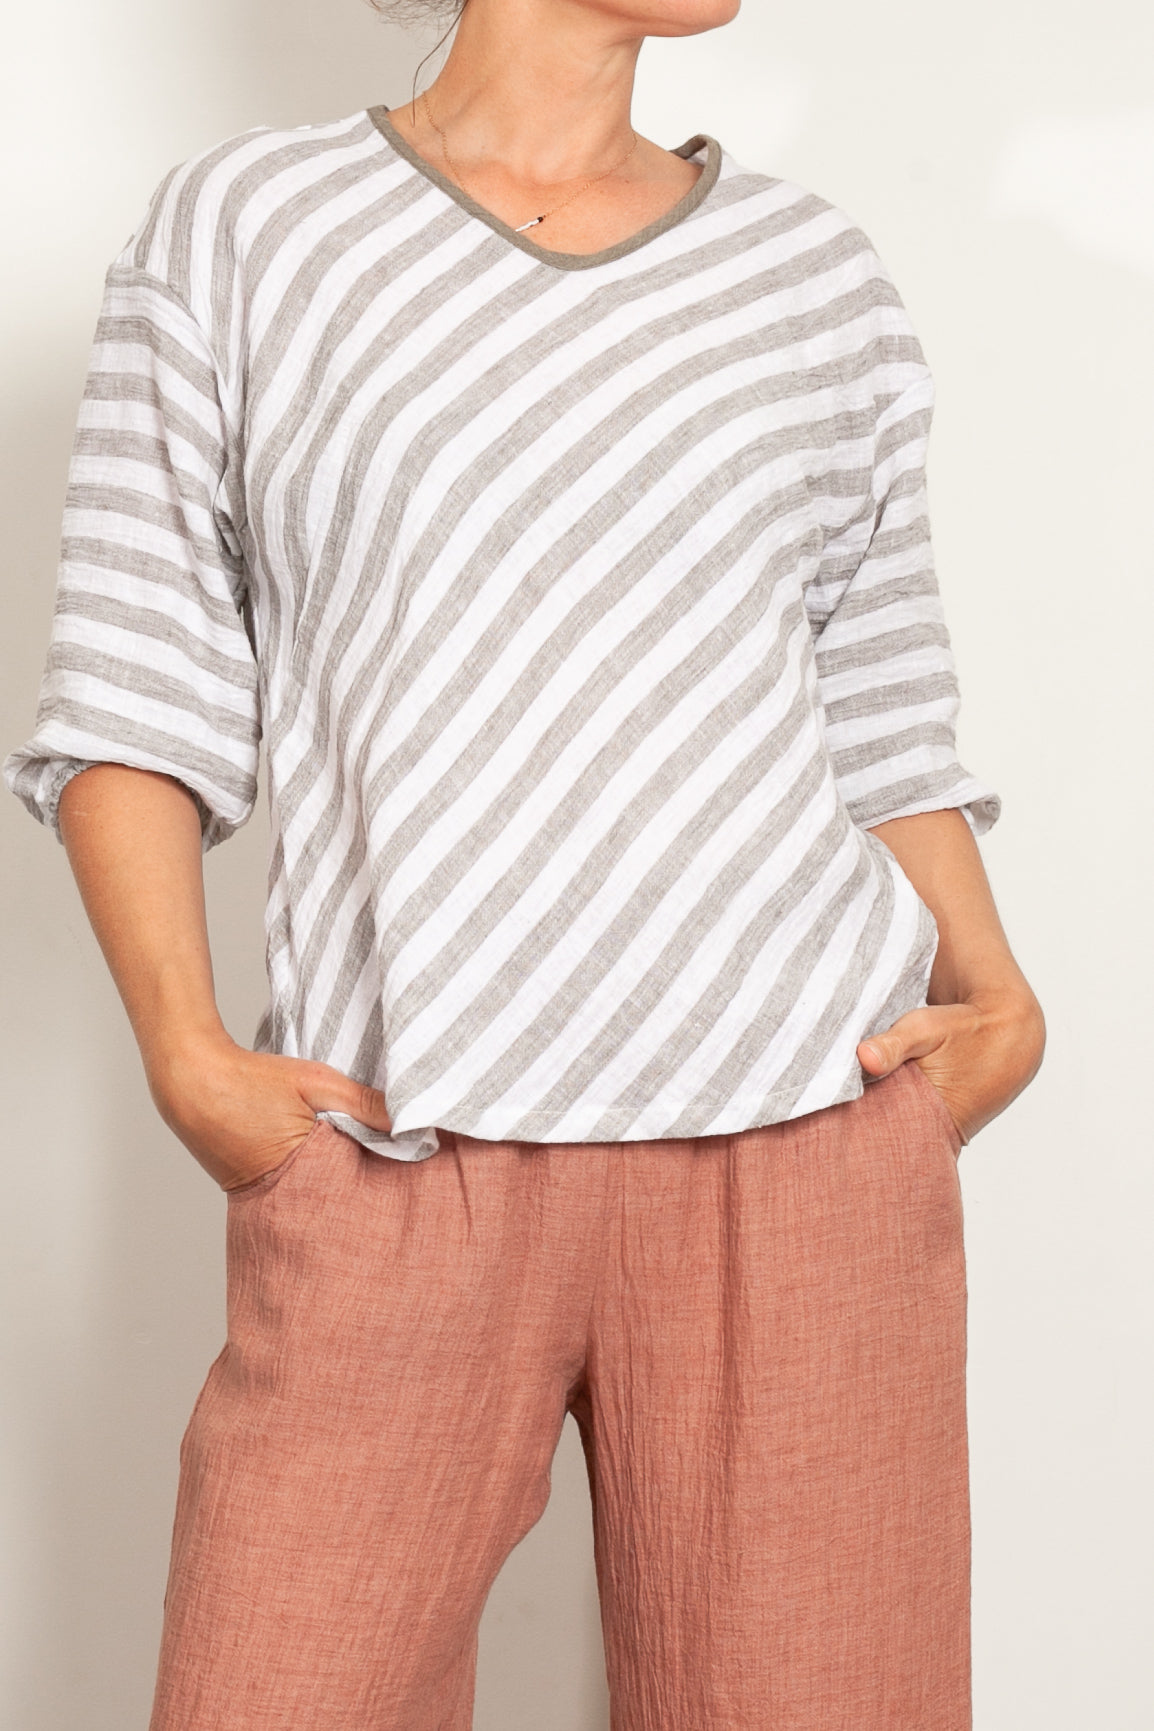 In the Sac Linen Ayra Striped Top